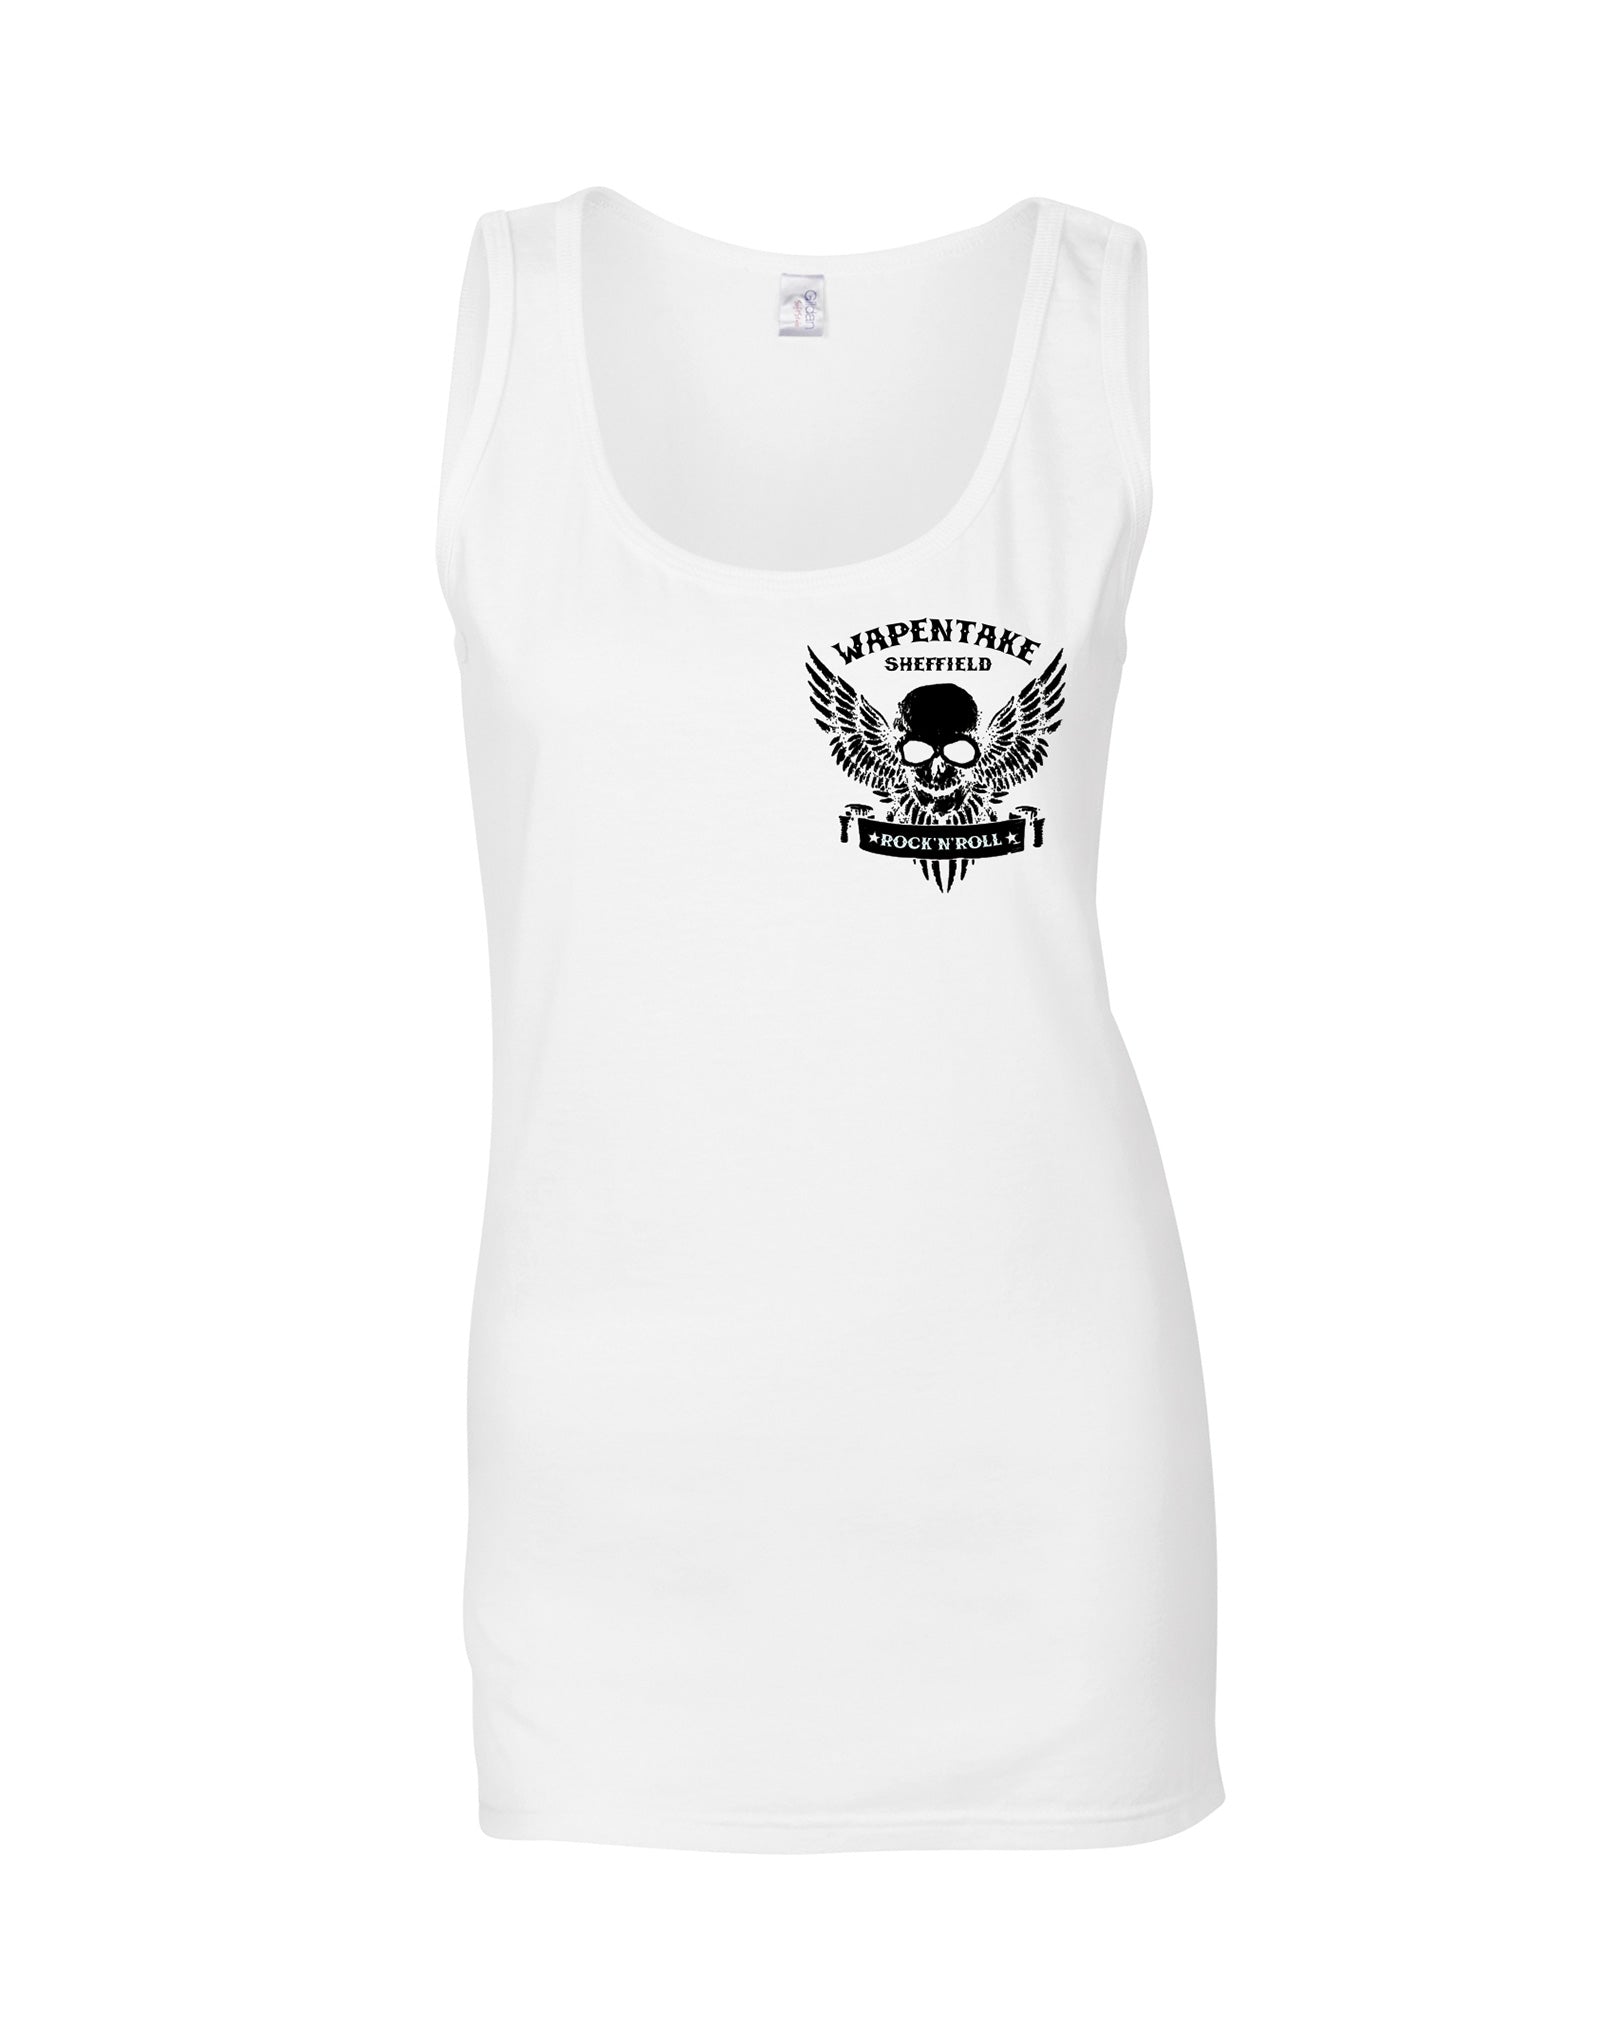 Wapentake skull/wings ladies fit vest - various colours - Dirty Stop Outs